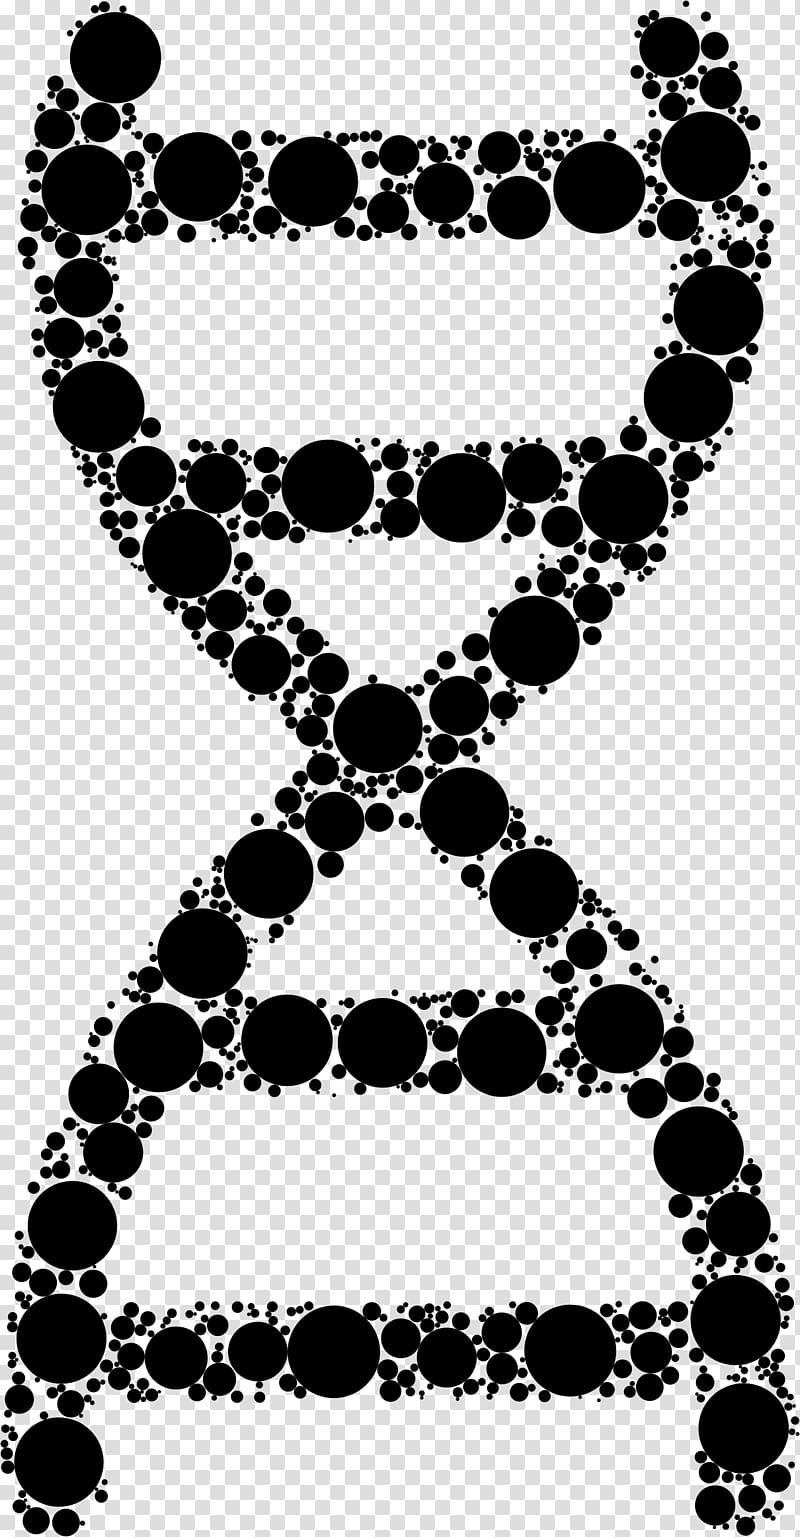 DNA Nucleic acid double helix iOS jailbreaking Polymerase chain reaction Nucleic acid methods, DNA transparent background PNG clipart